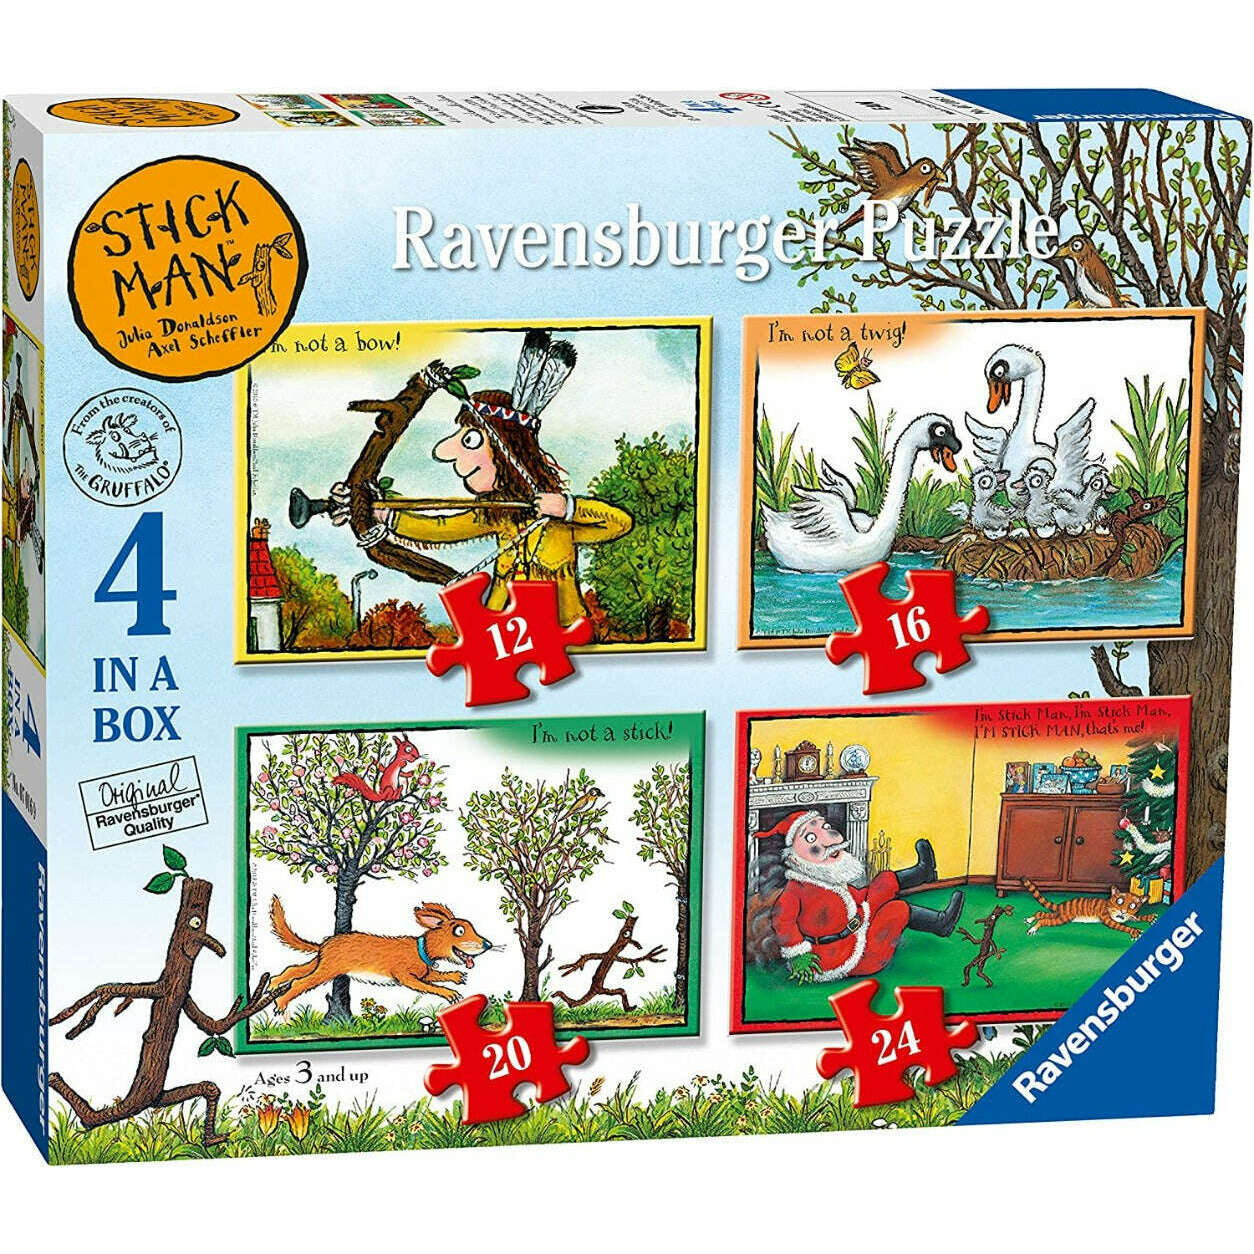 Ravensburger 4 Puzzles in a Box Stick Man – Toys N Tuck